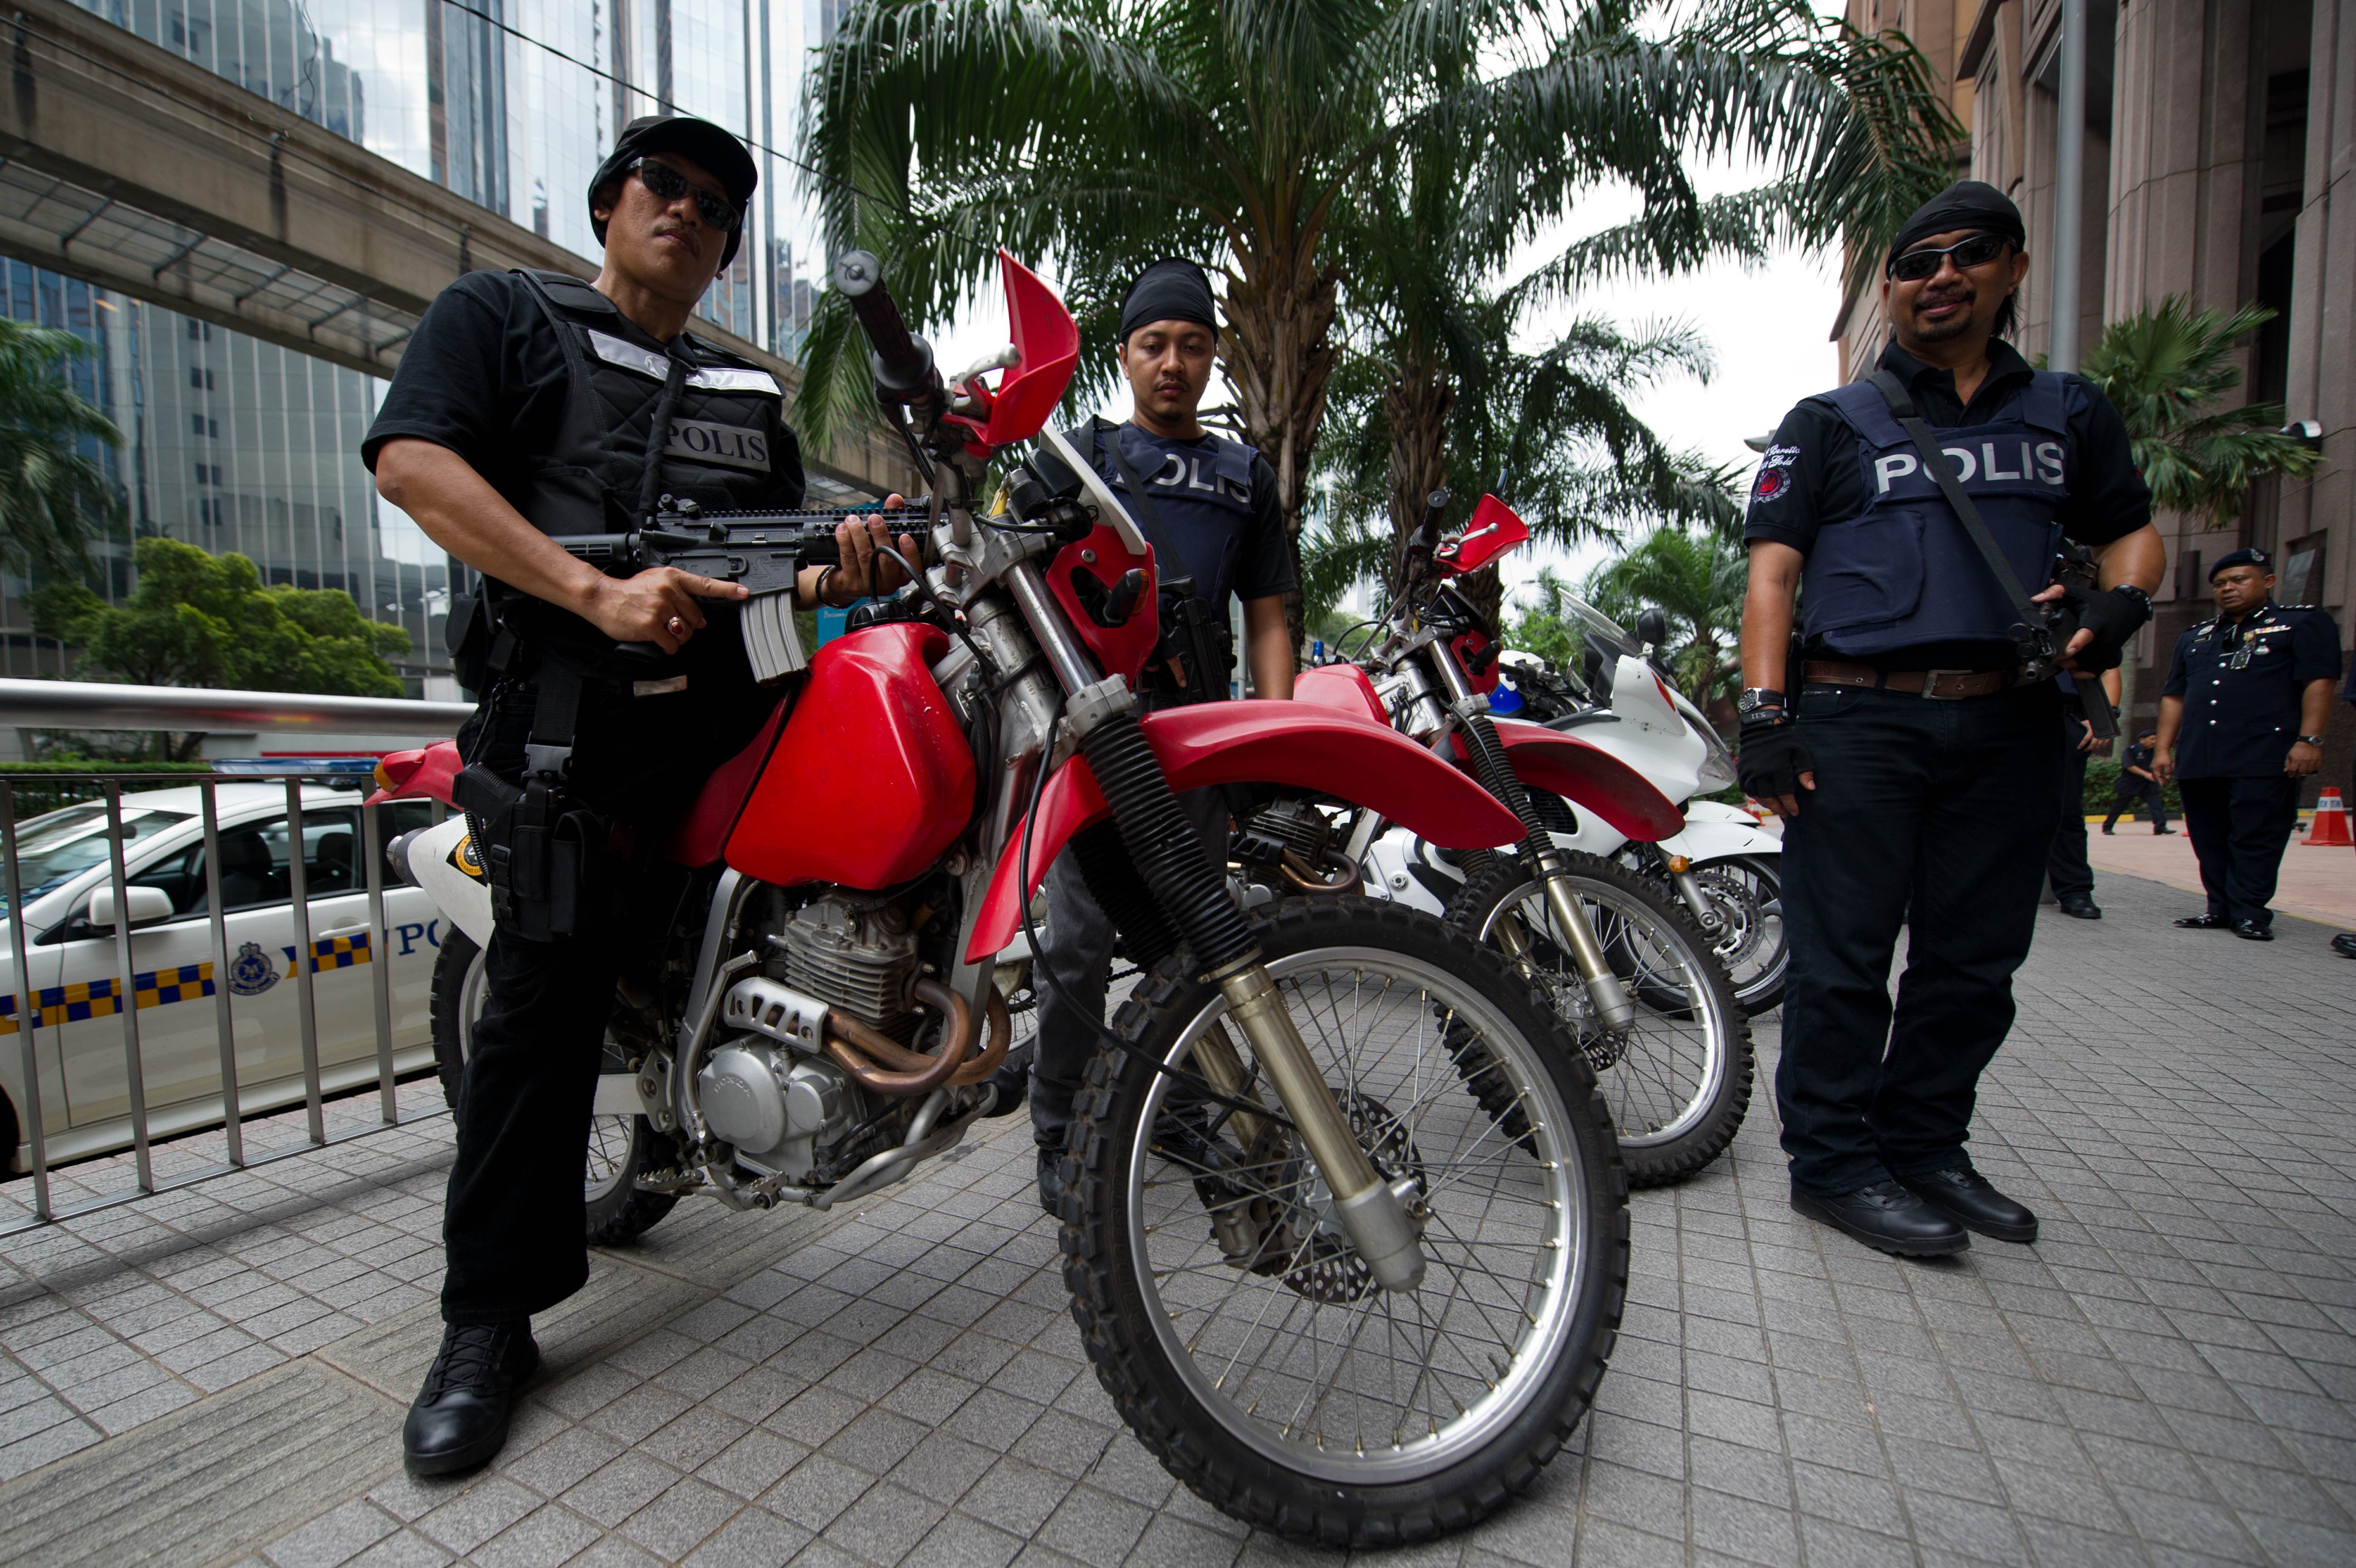 Malaysian policemen are battling against gang violence blamed on drug-trafficking turf wars, easily obtained guns, and government policies that critics say marginalise ethnic Indians. Photo: AFP